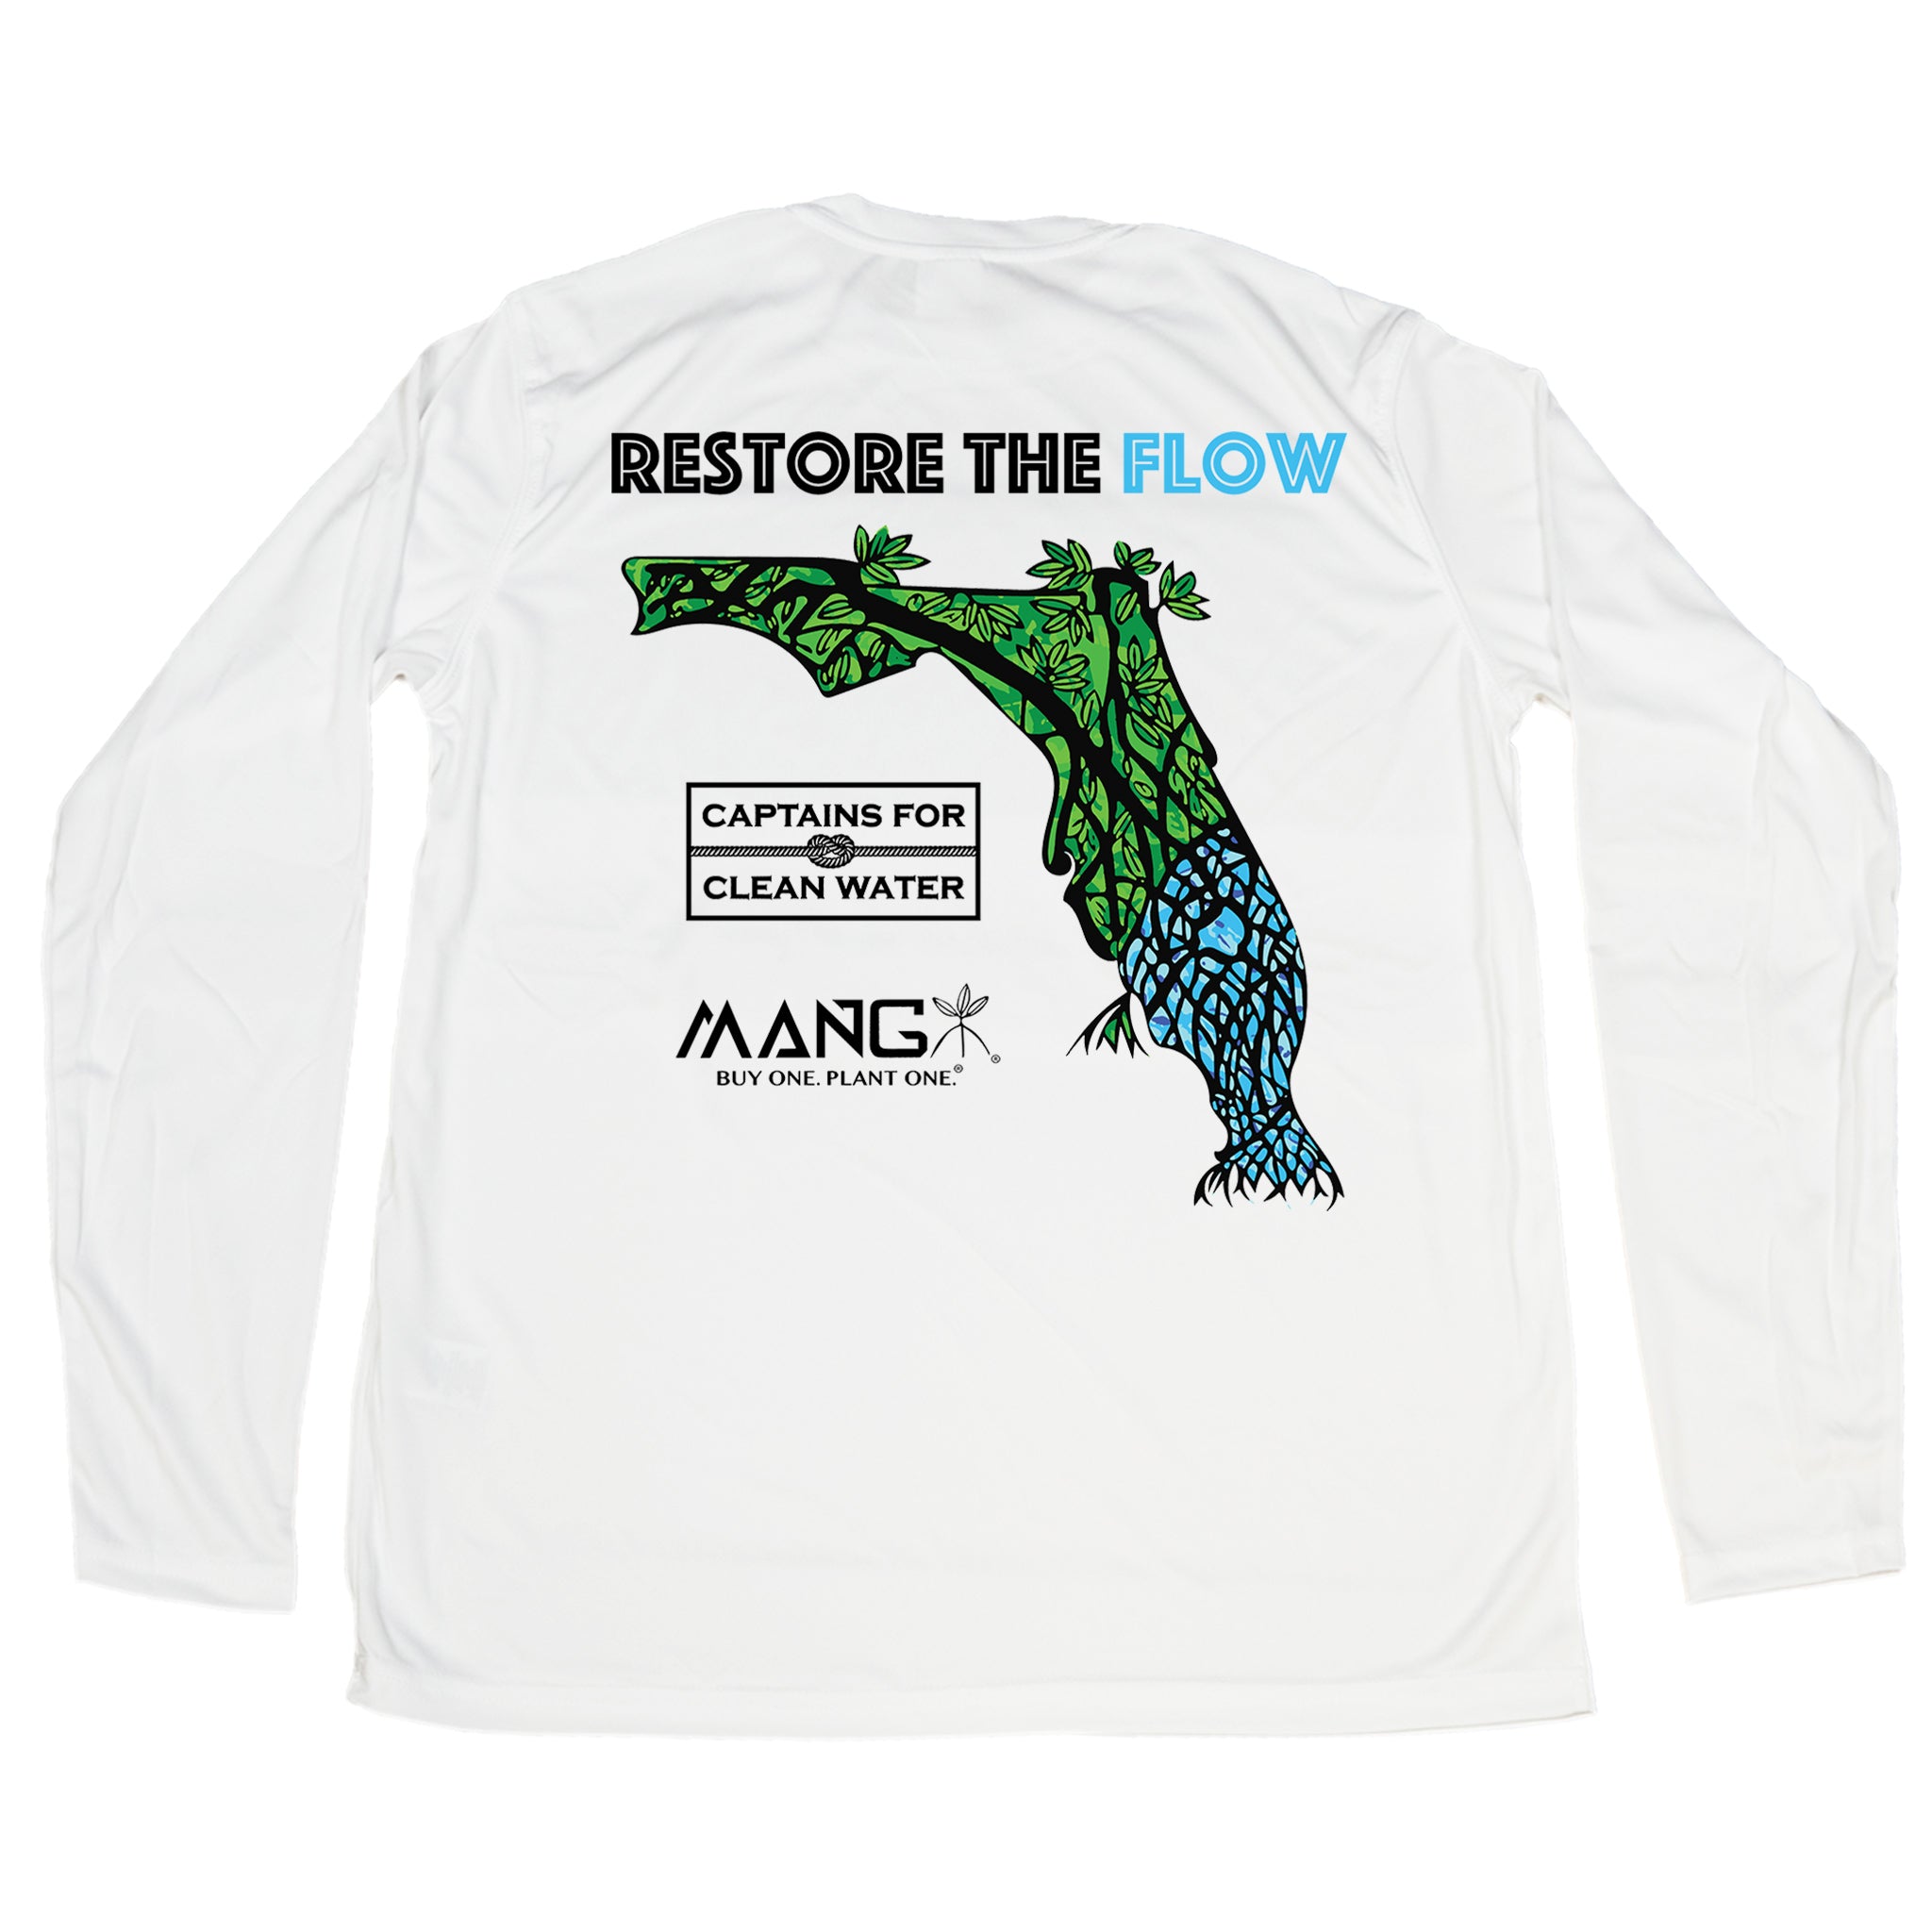 MANG Restore The Flow ™ - LS - XS-White